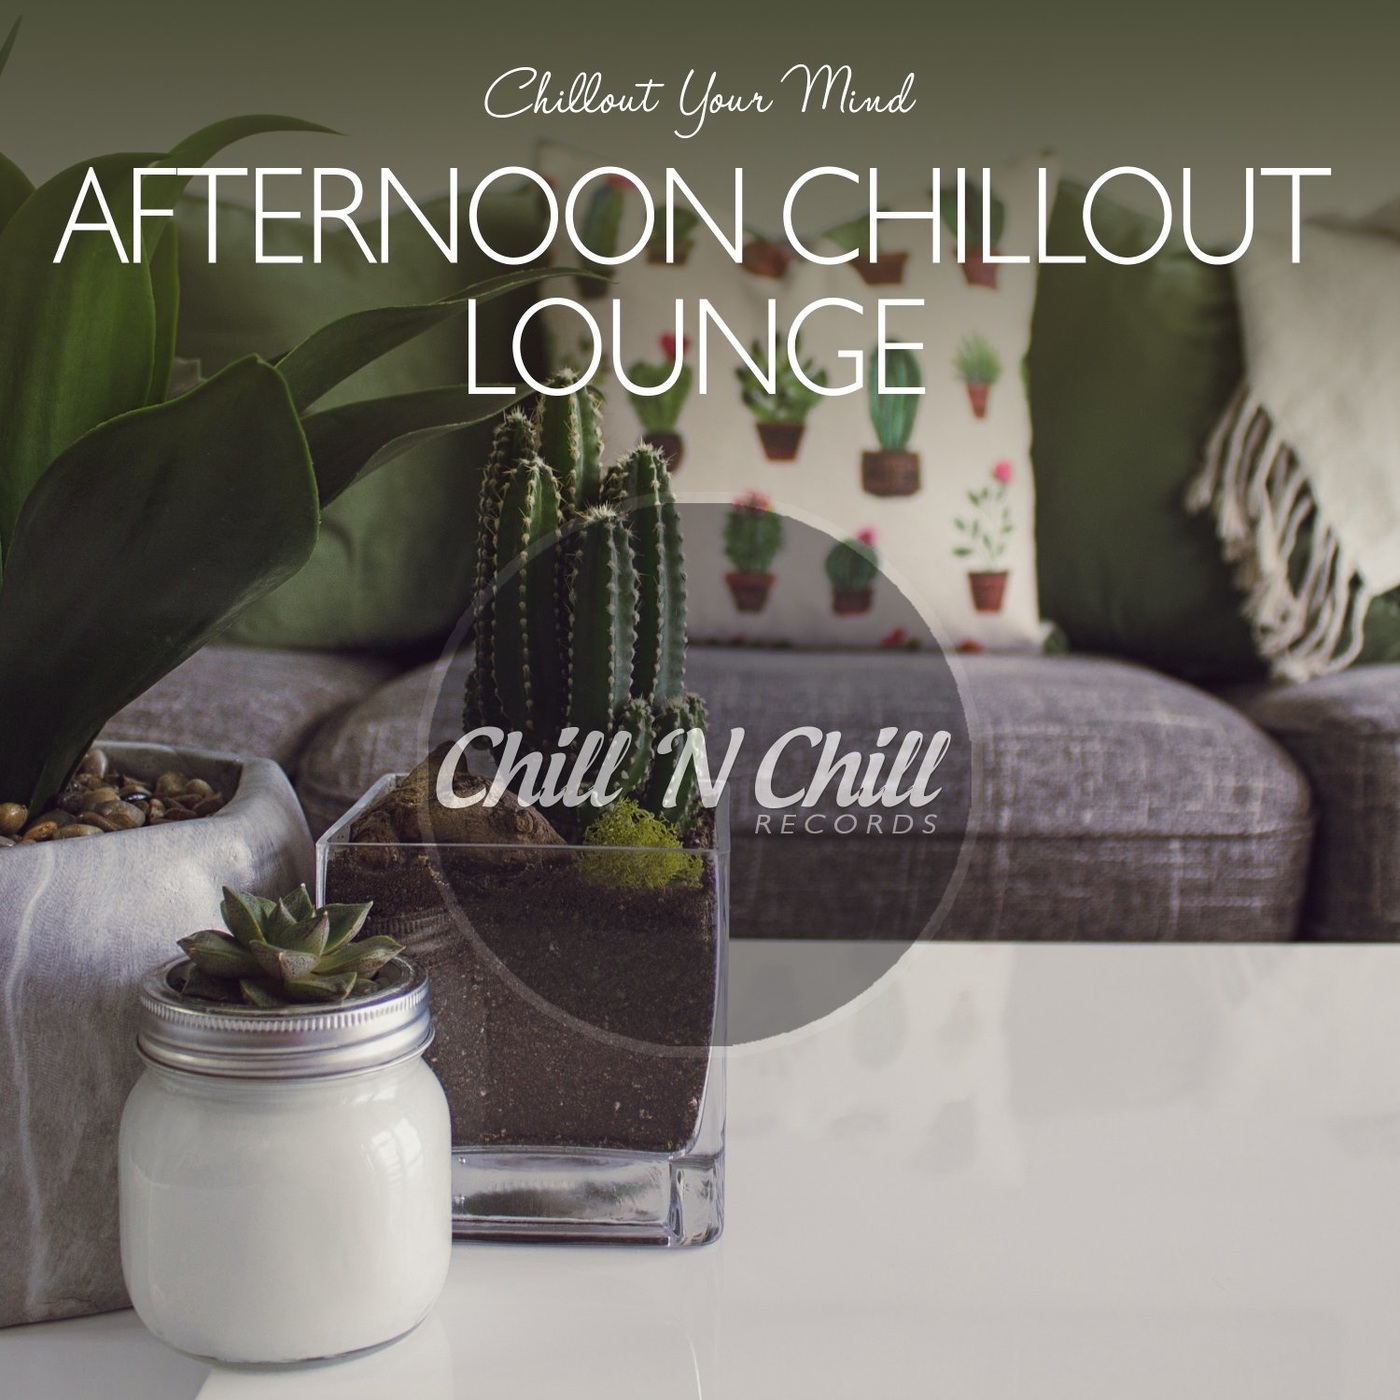 chill n chill records《afternoon chillout lounge：chillout your m